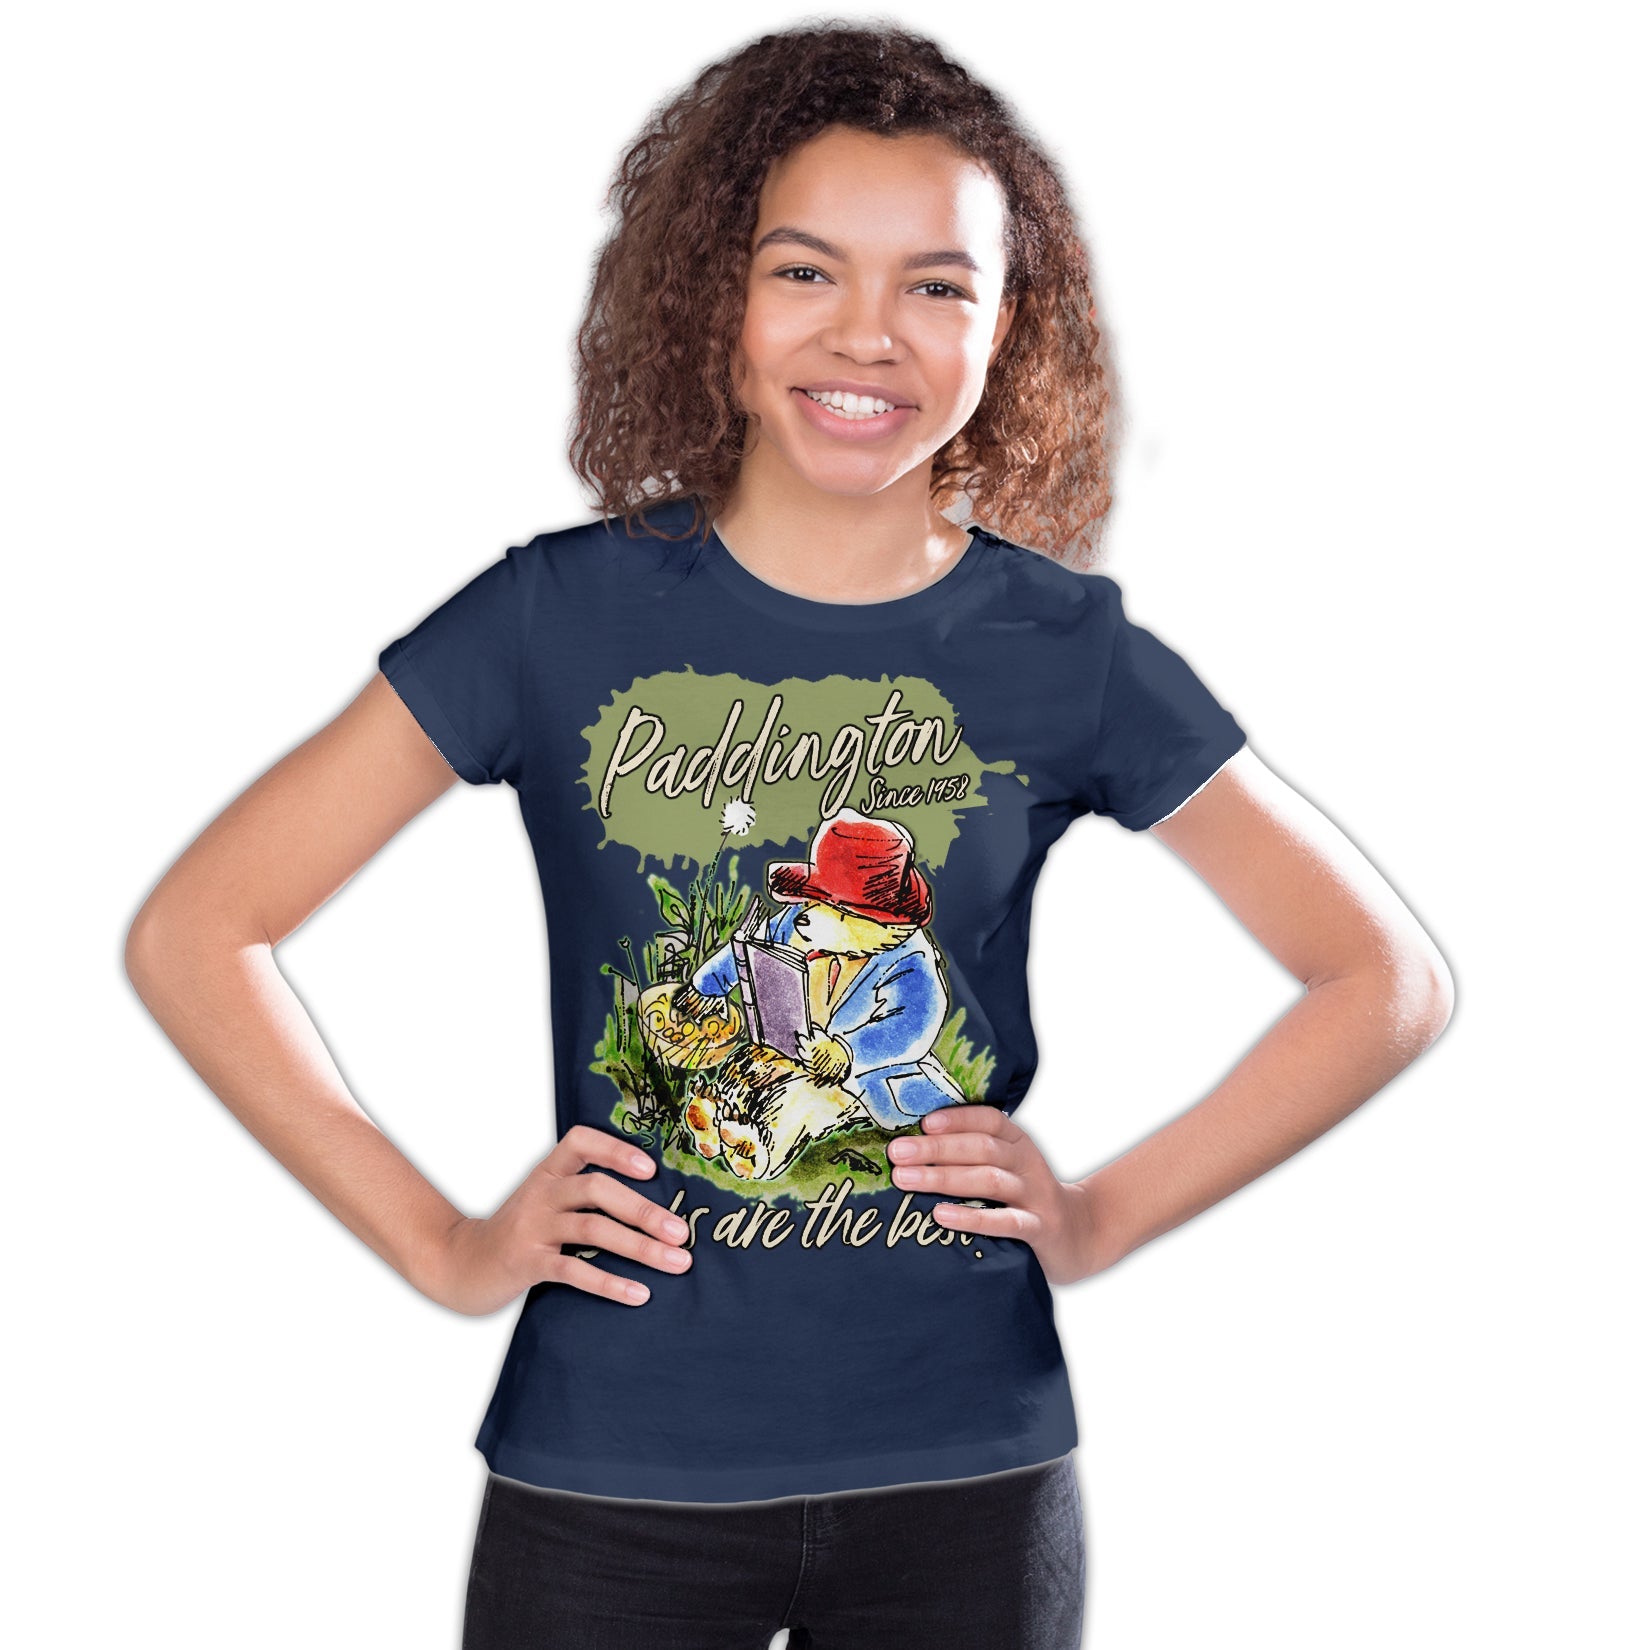 Paddington Bear Book Picnic Party Best Official Youth T-Shirt